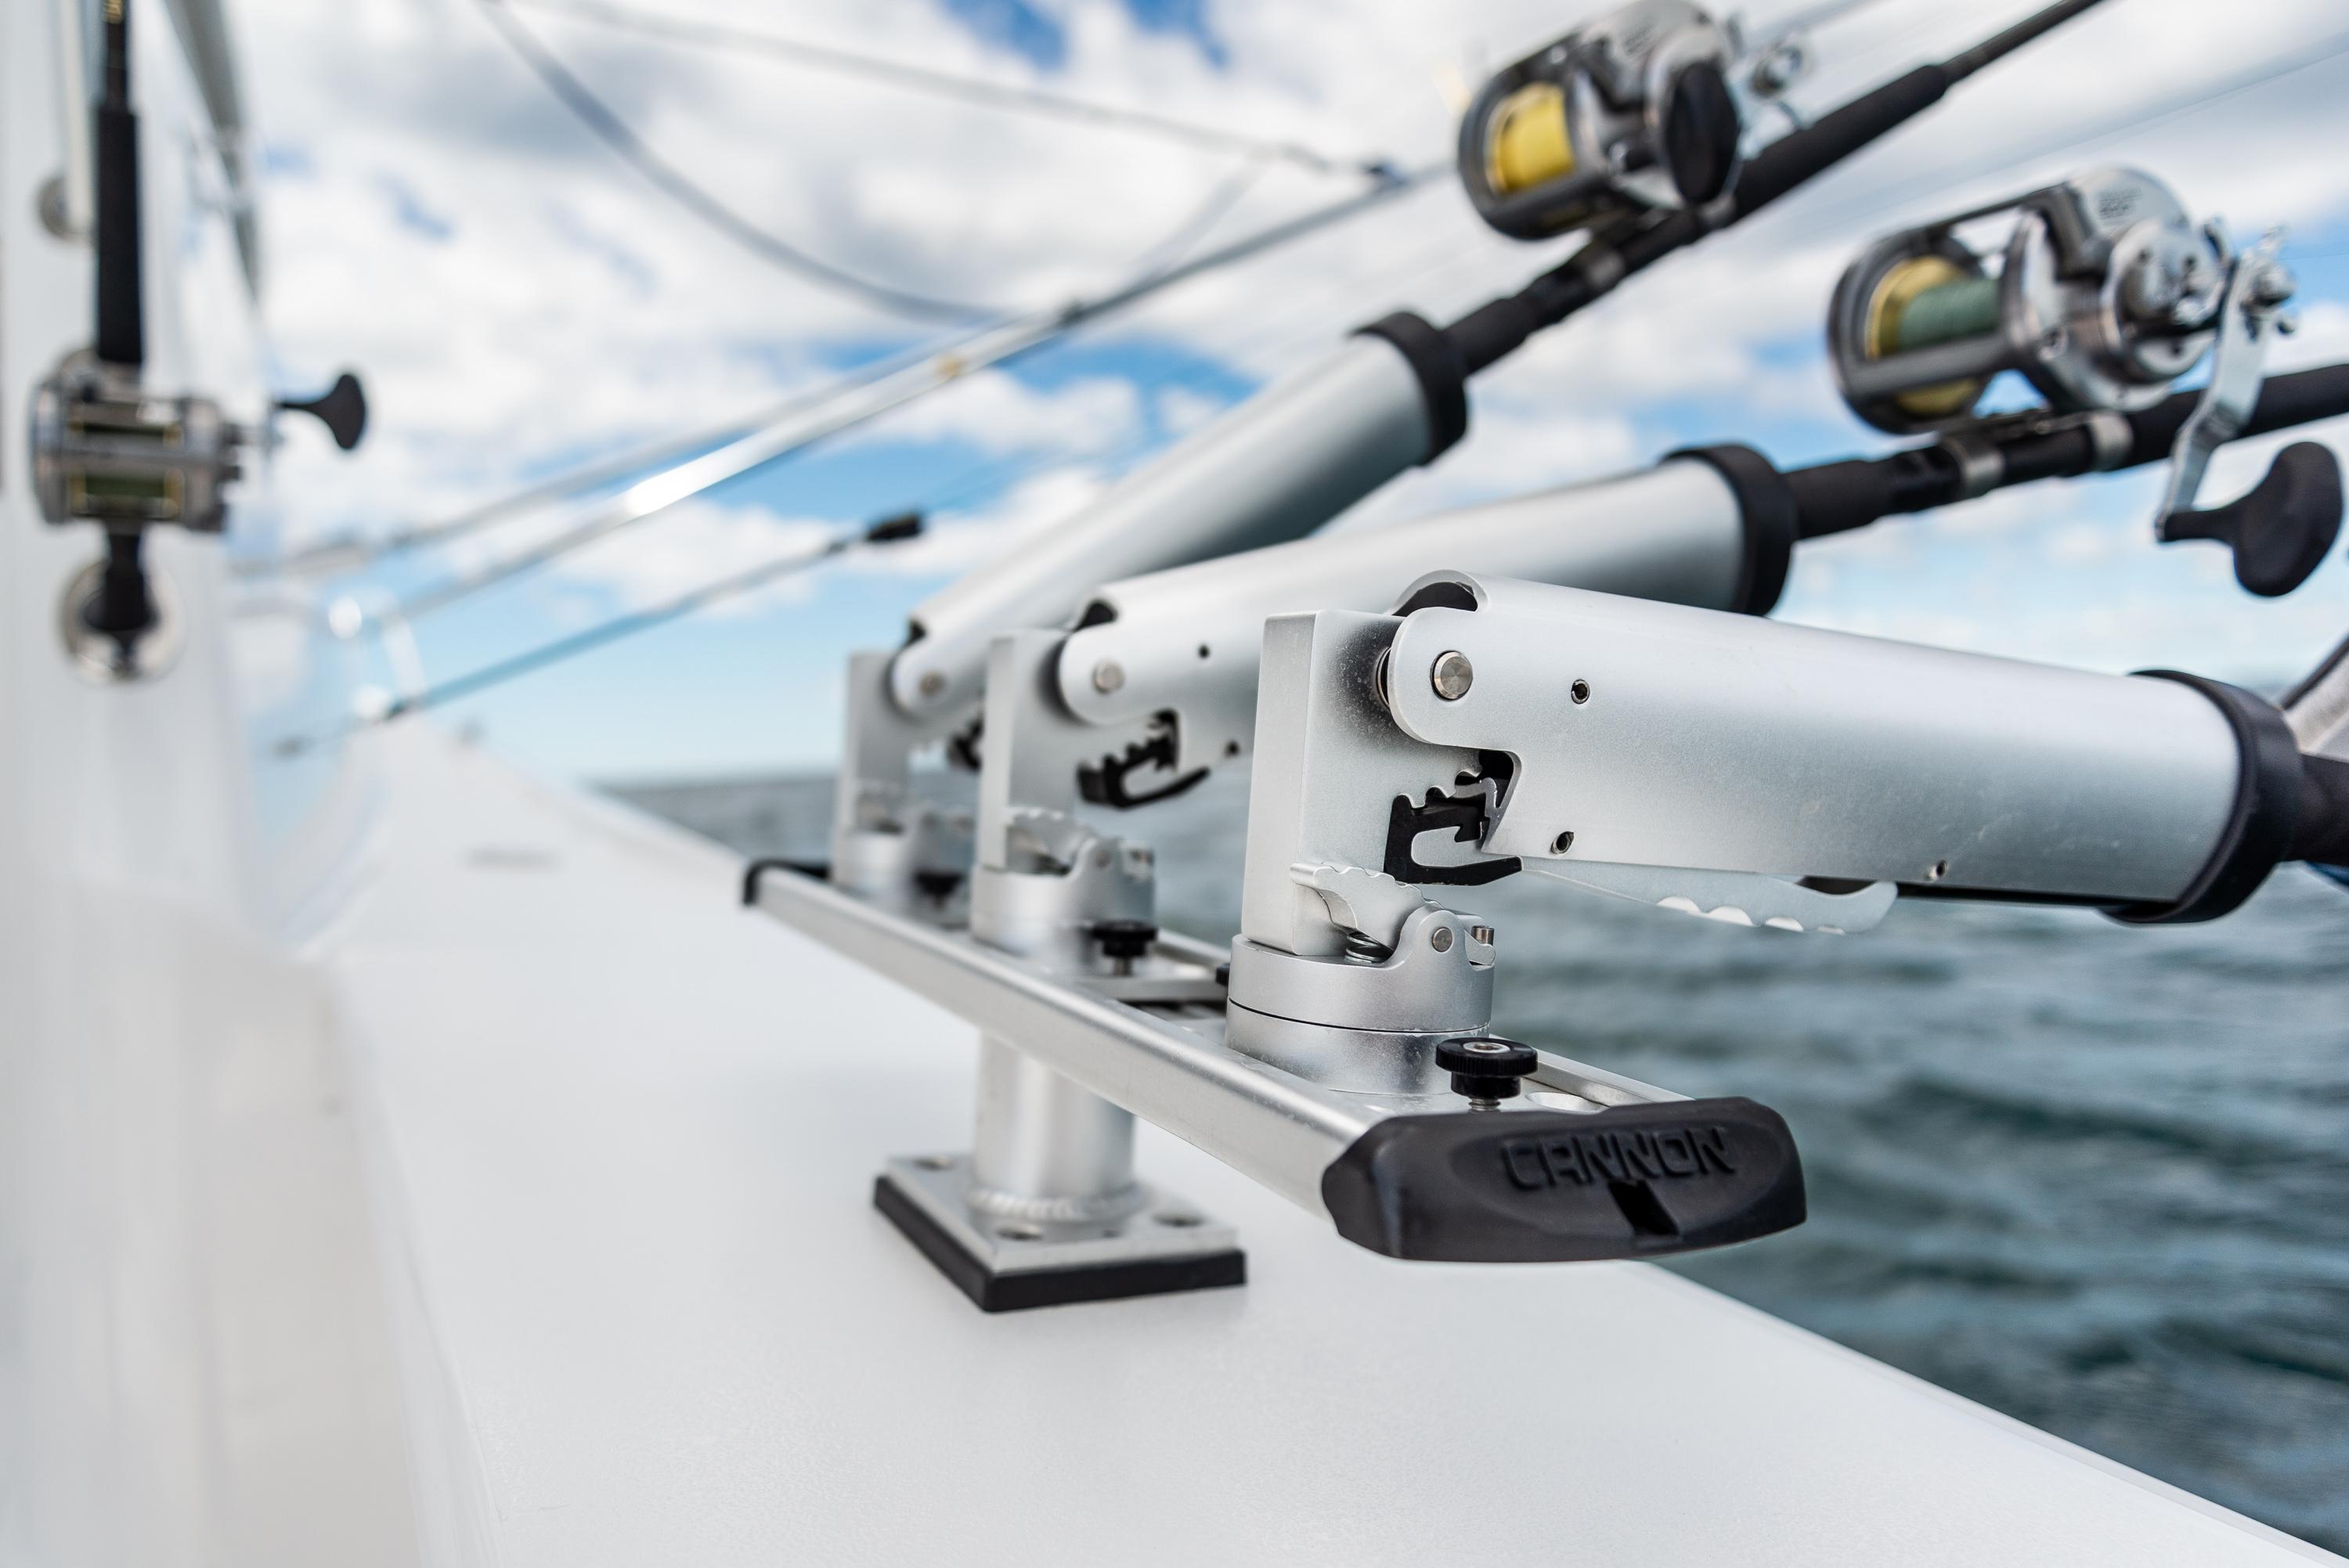 Cannon Downriggers on X: The Cannon Dual Axis Rod Holders